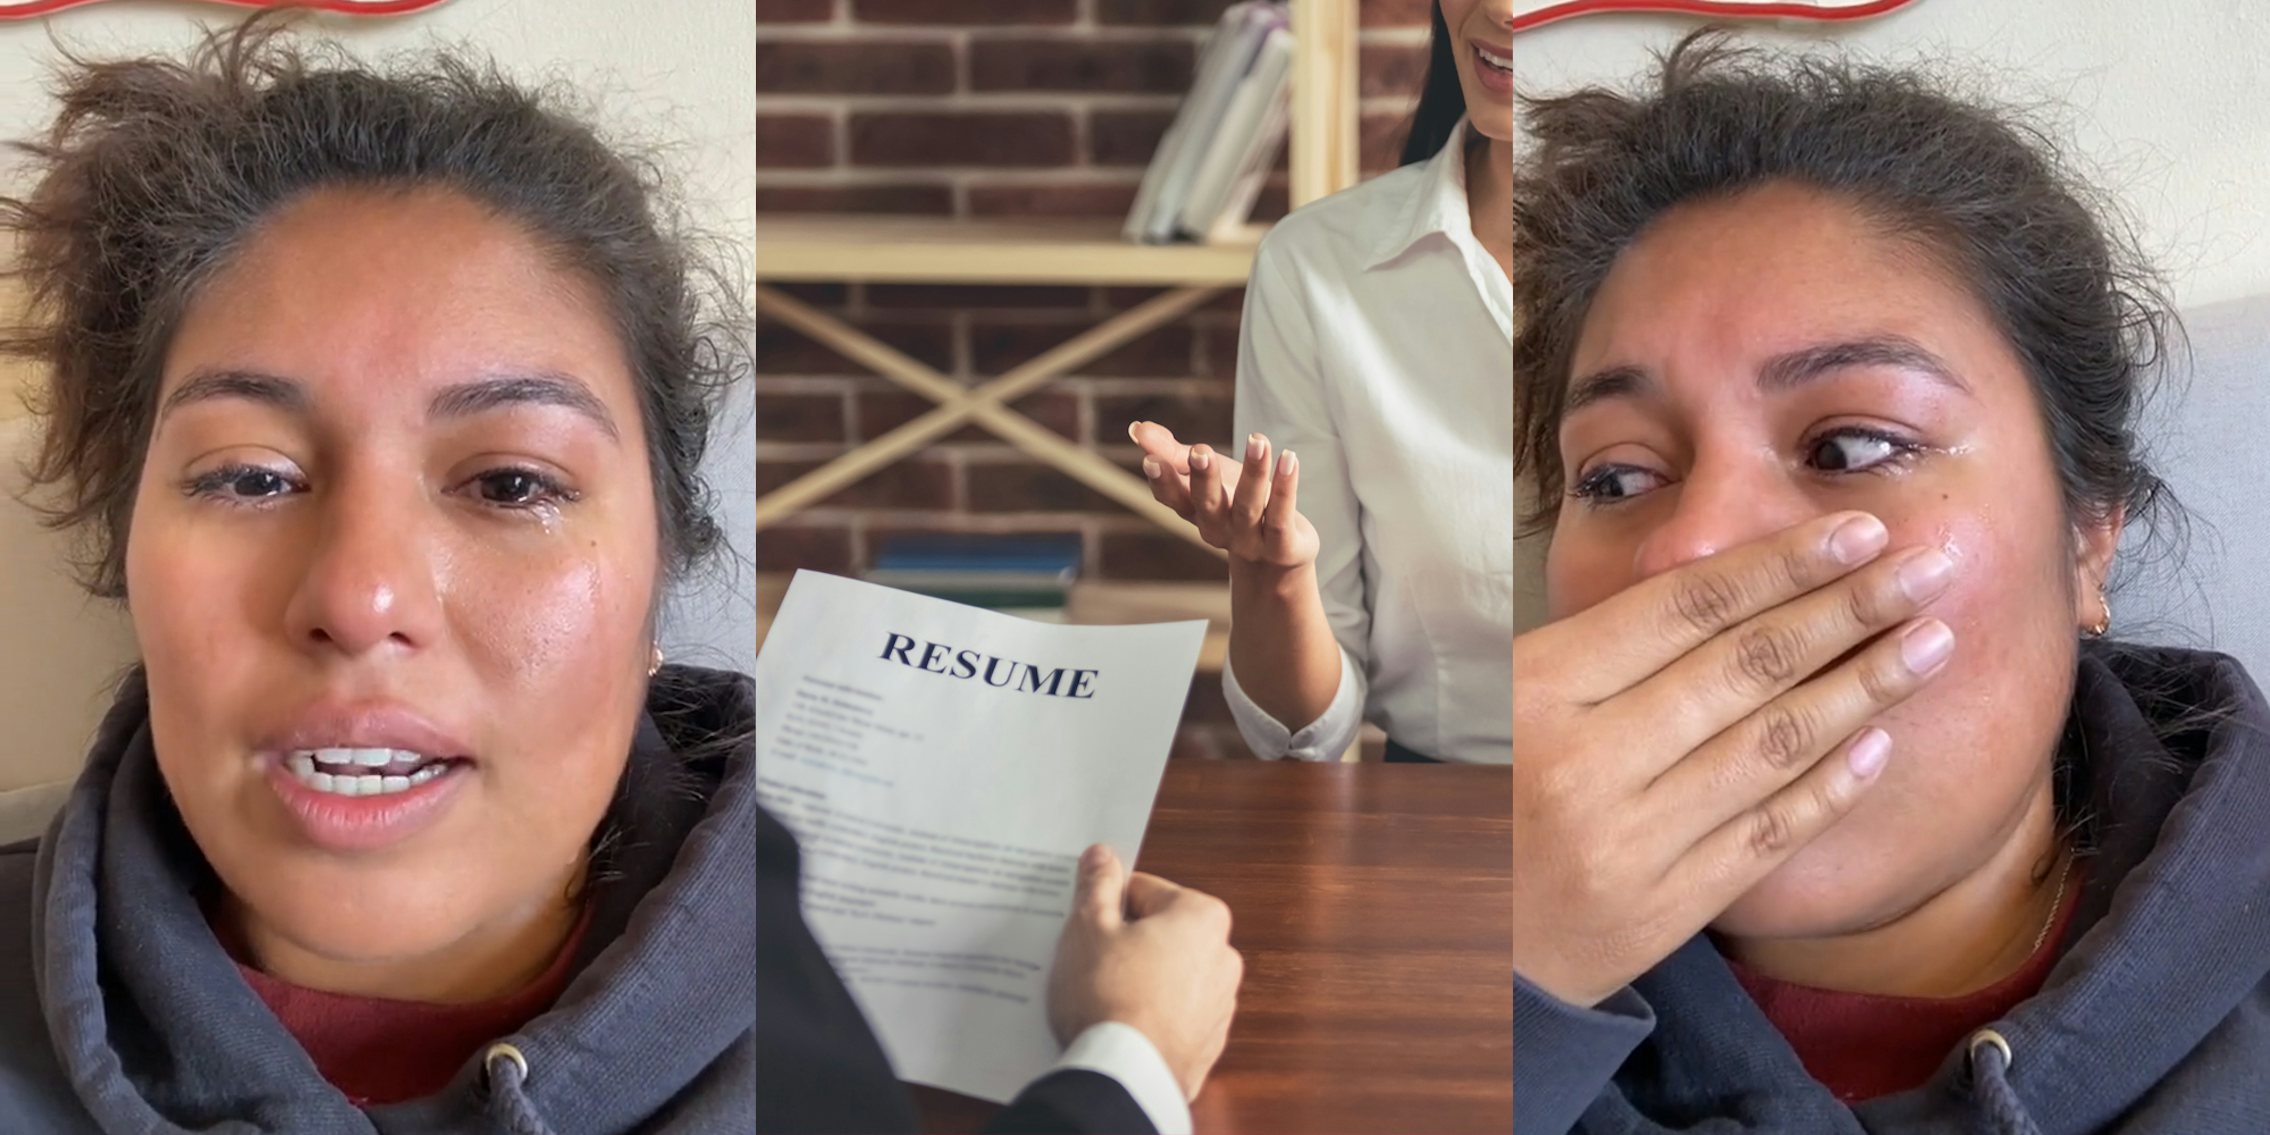 job hunter crying speaking (l) person at interview with hand out frustrated at interviewer holding resume across desk (c) job hunter crying with hand on mouth (r)